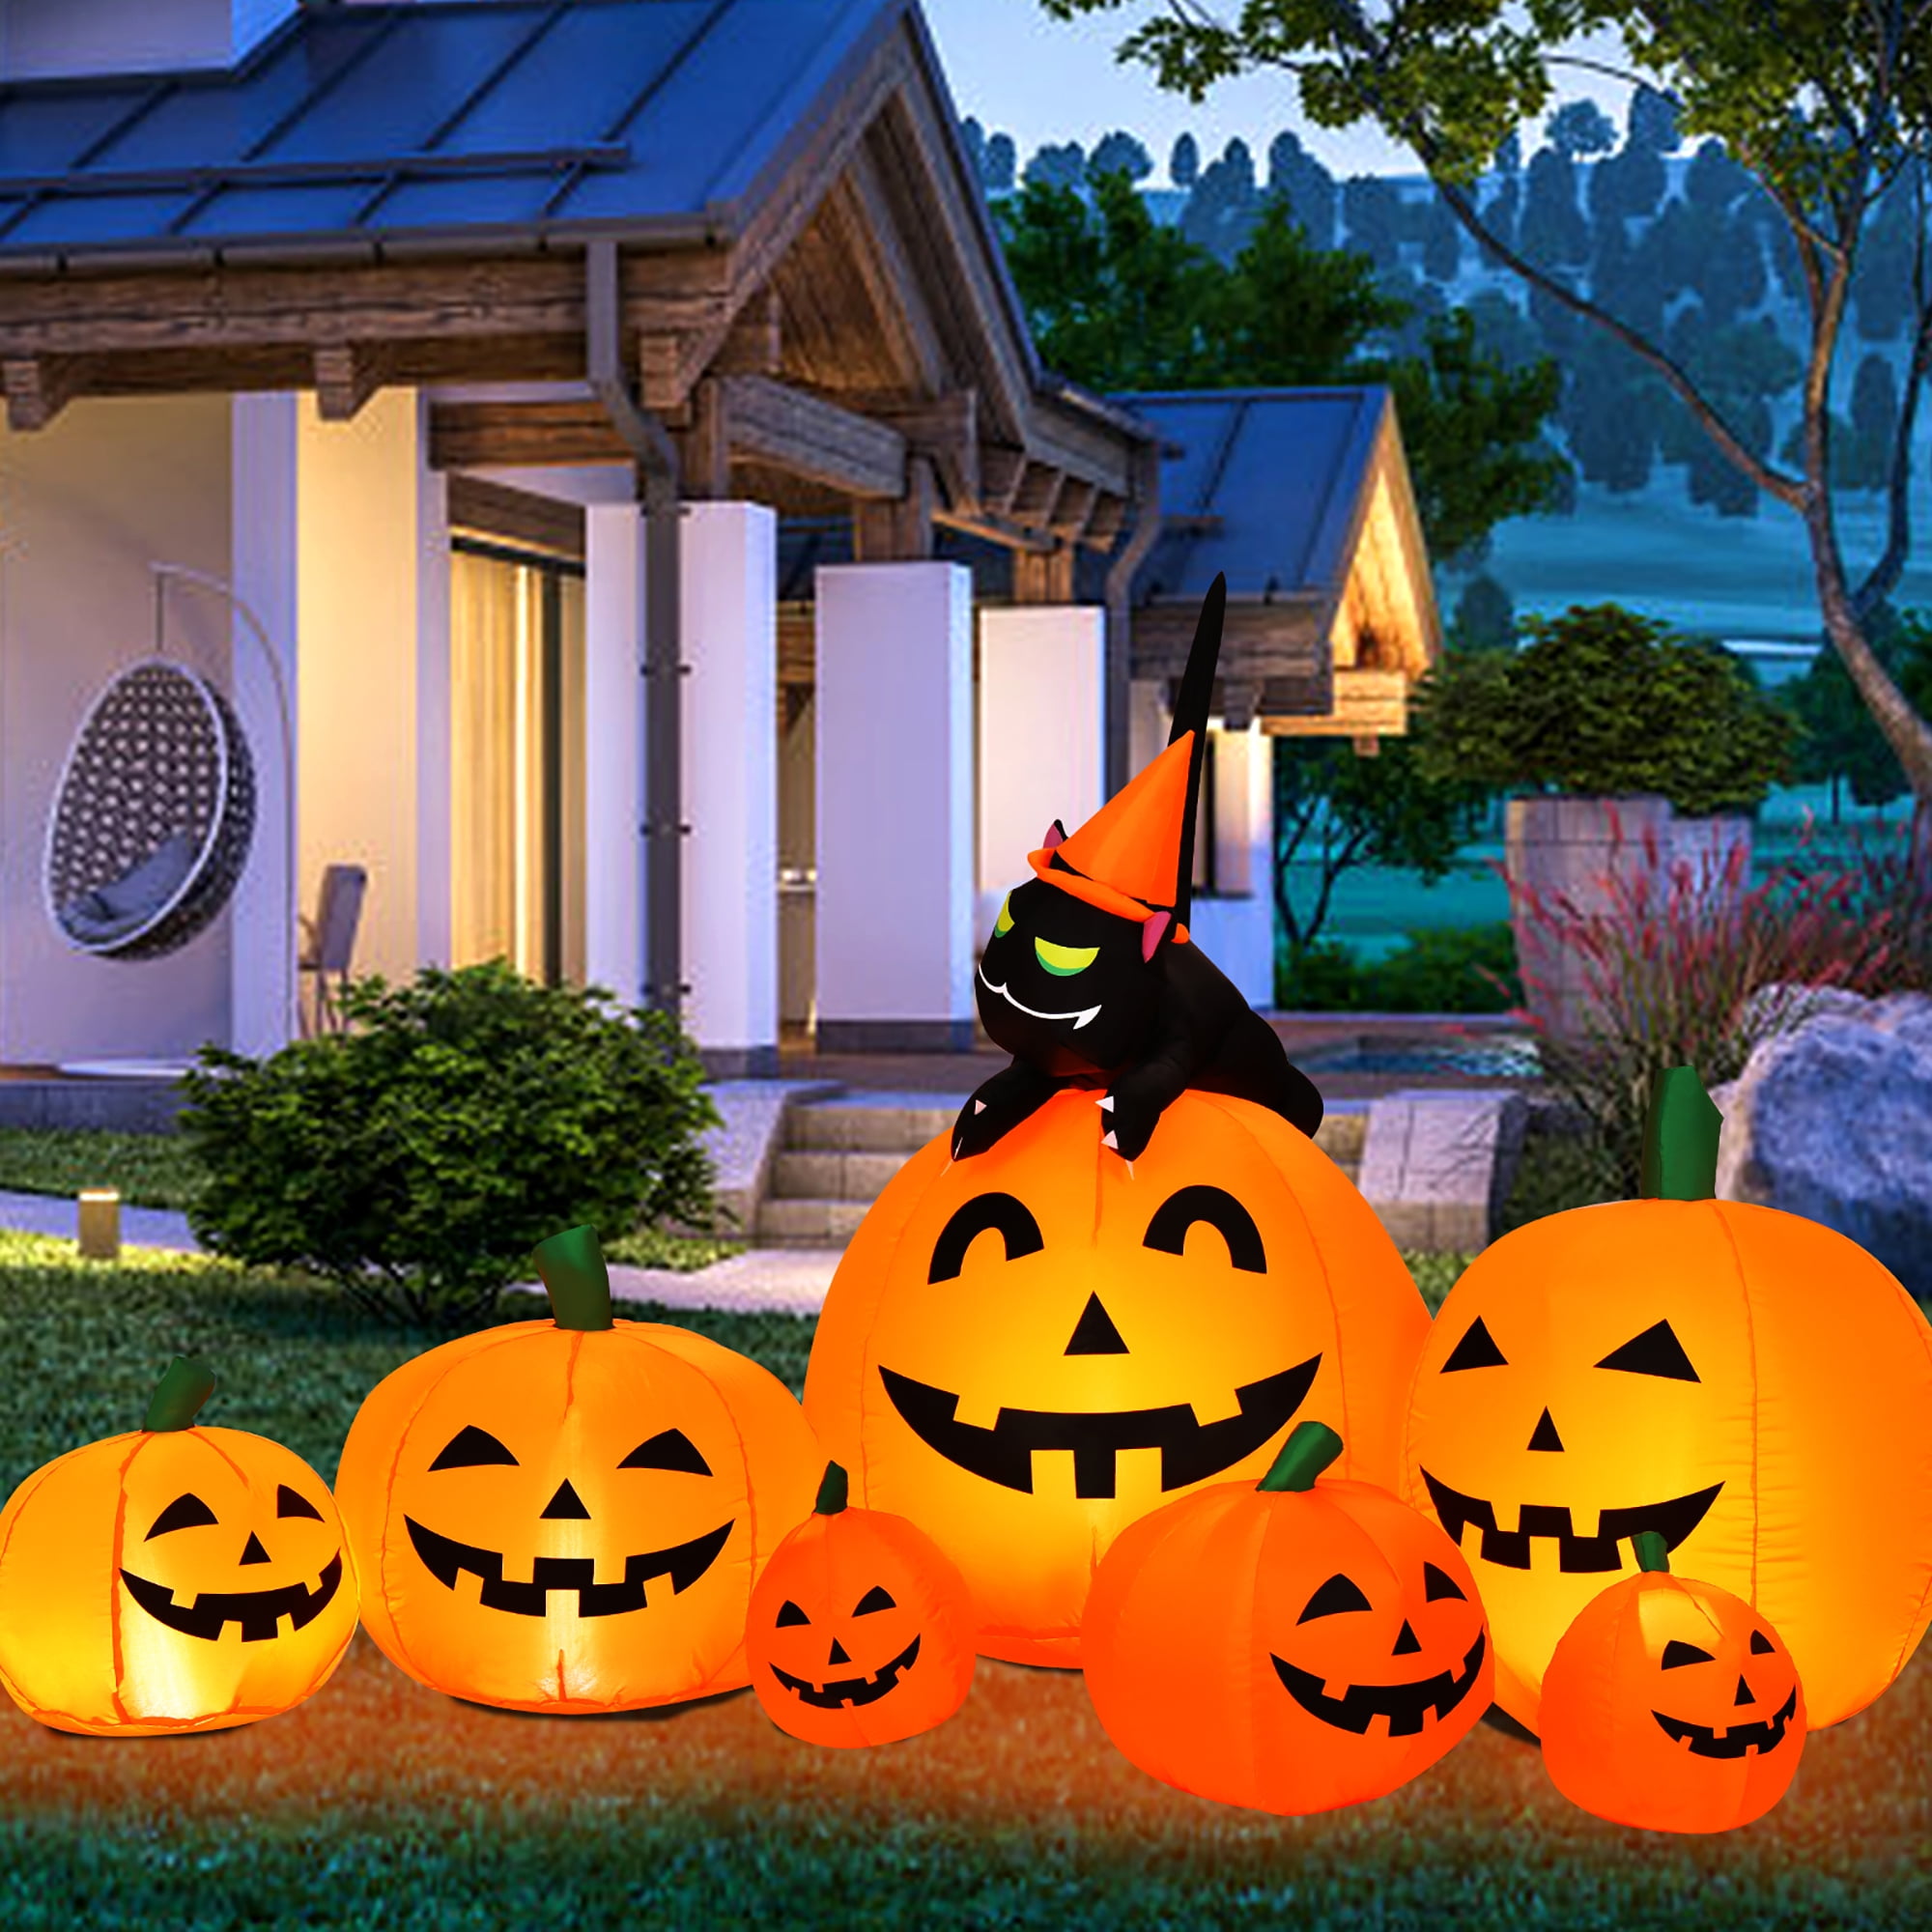 Large Inflatable Flashing Ligh Up Pumpkin Patch Halloween yard & Lawn decoration 